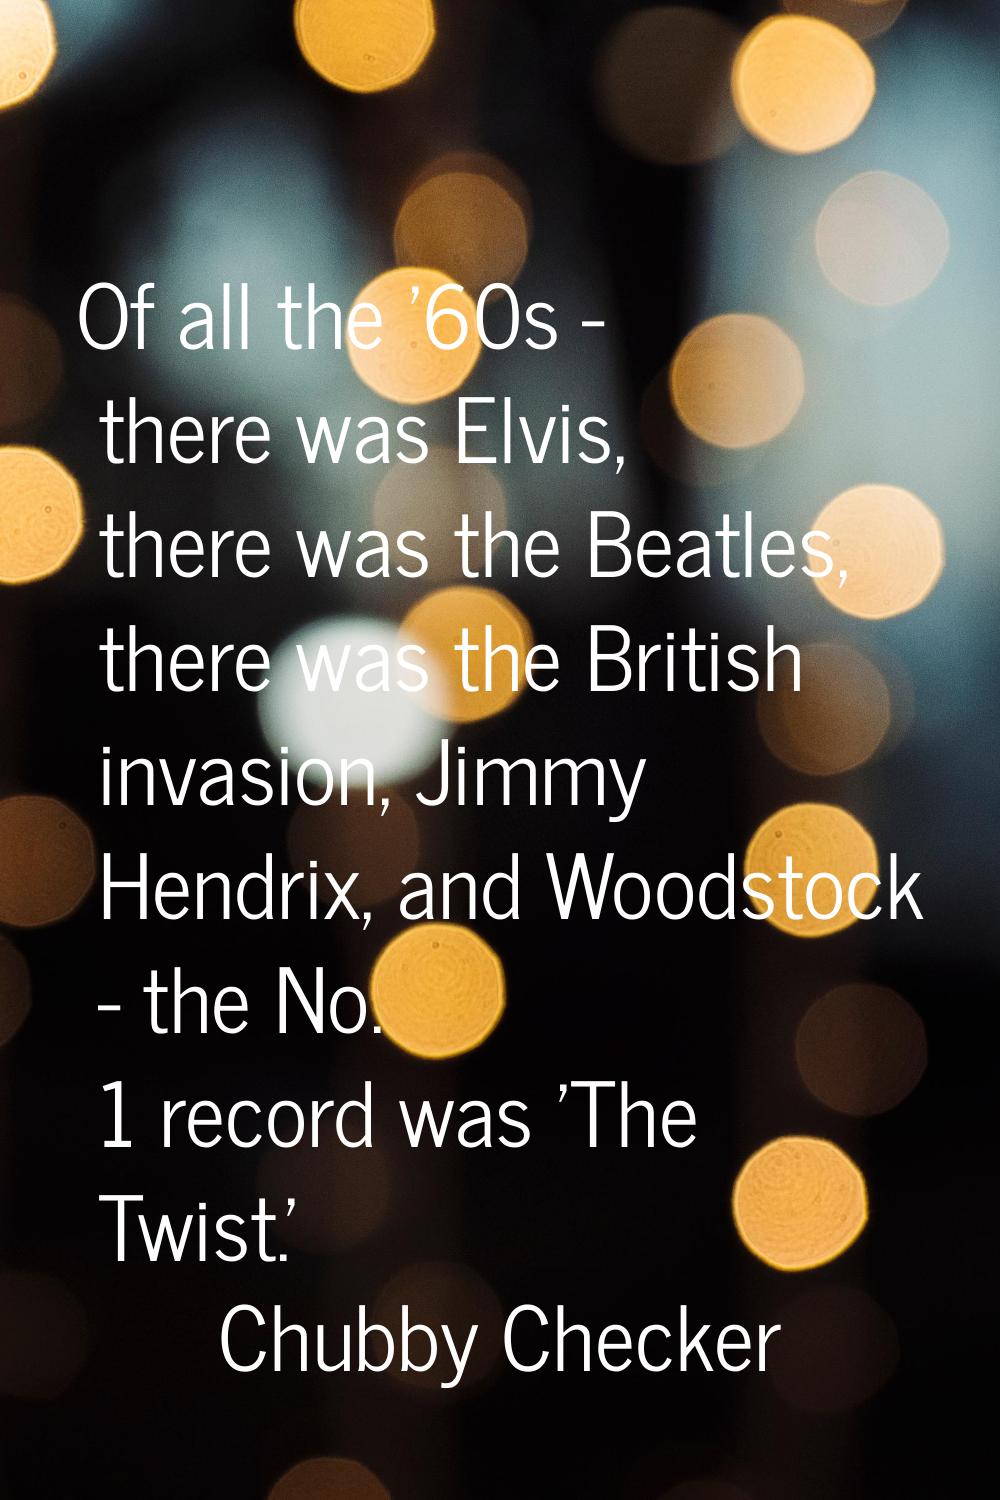 Of all the '60s - there was Elvis, there was the Beatles, there was the British invasion, Jimmy Hen